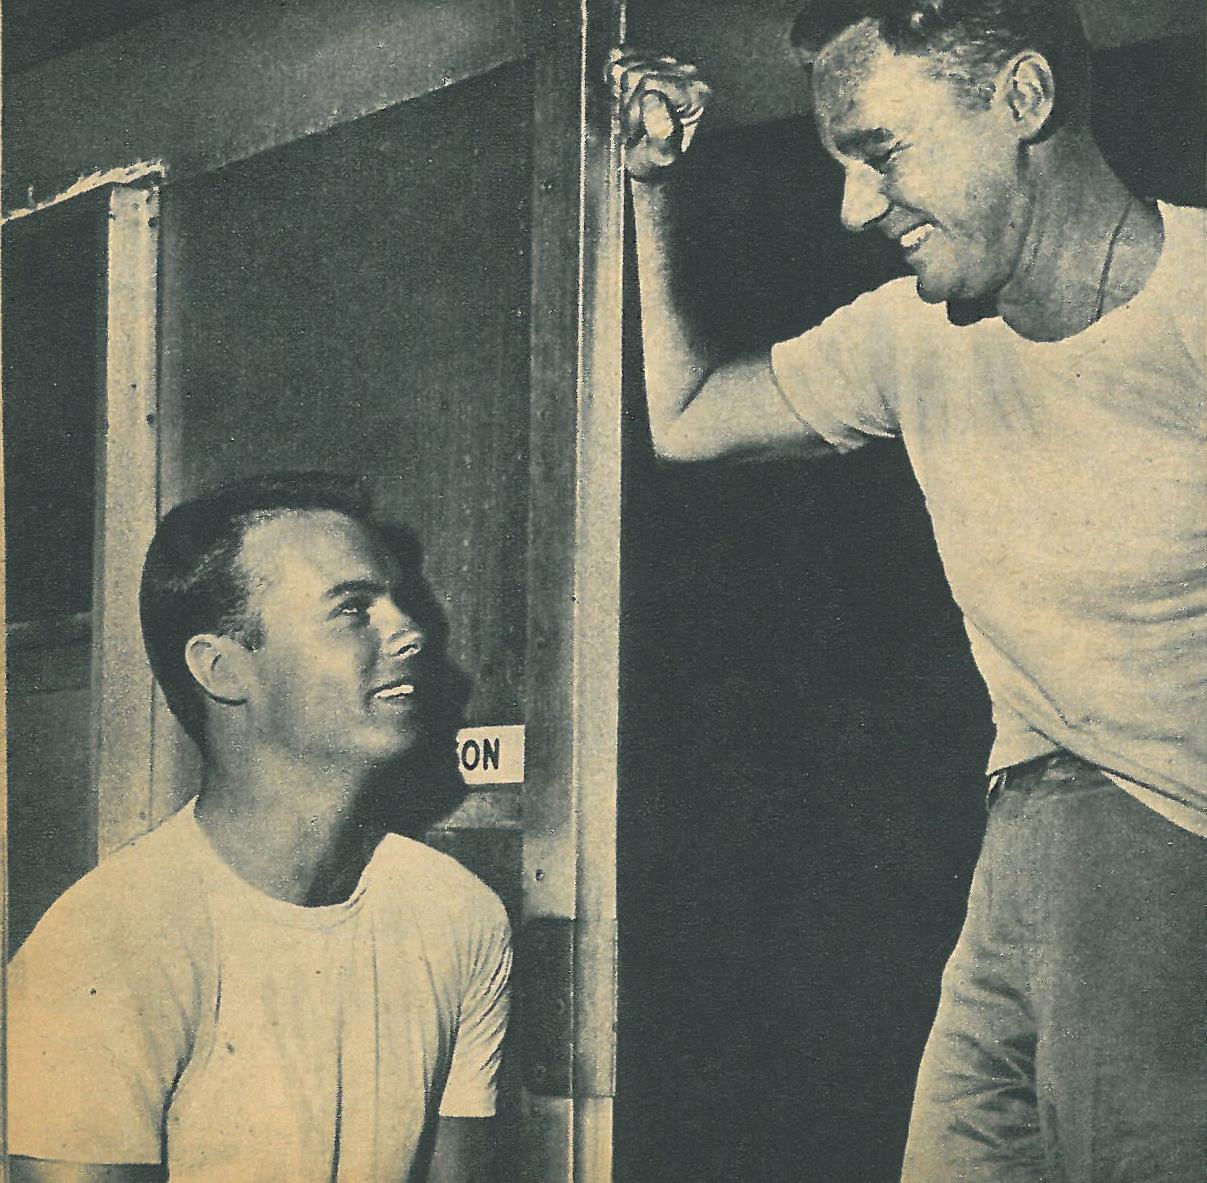  Jan. 1954  Perhaps Bob’s earliest appearance in a fan magazine,  Screen World , Jan. 1954 (on newsstands in early Dec. 1953), when Bob was just finishing  They Rode West .  Photo of Bob and Van Johnson dates from Summer 1953 during  Caine  filming. 